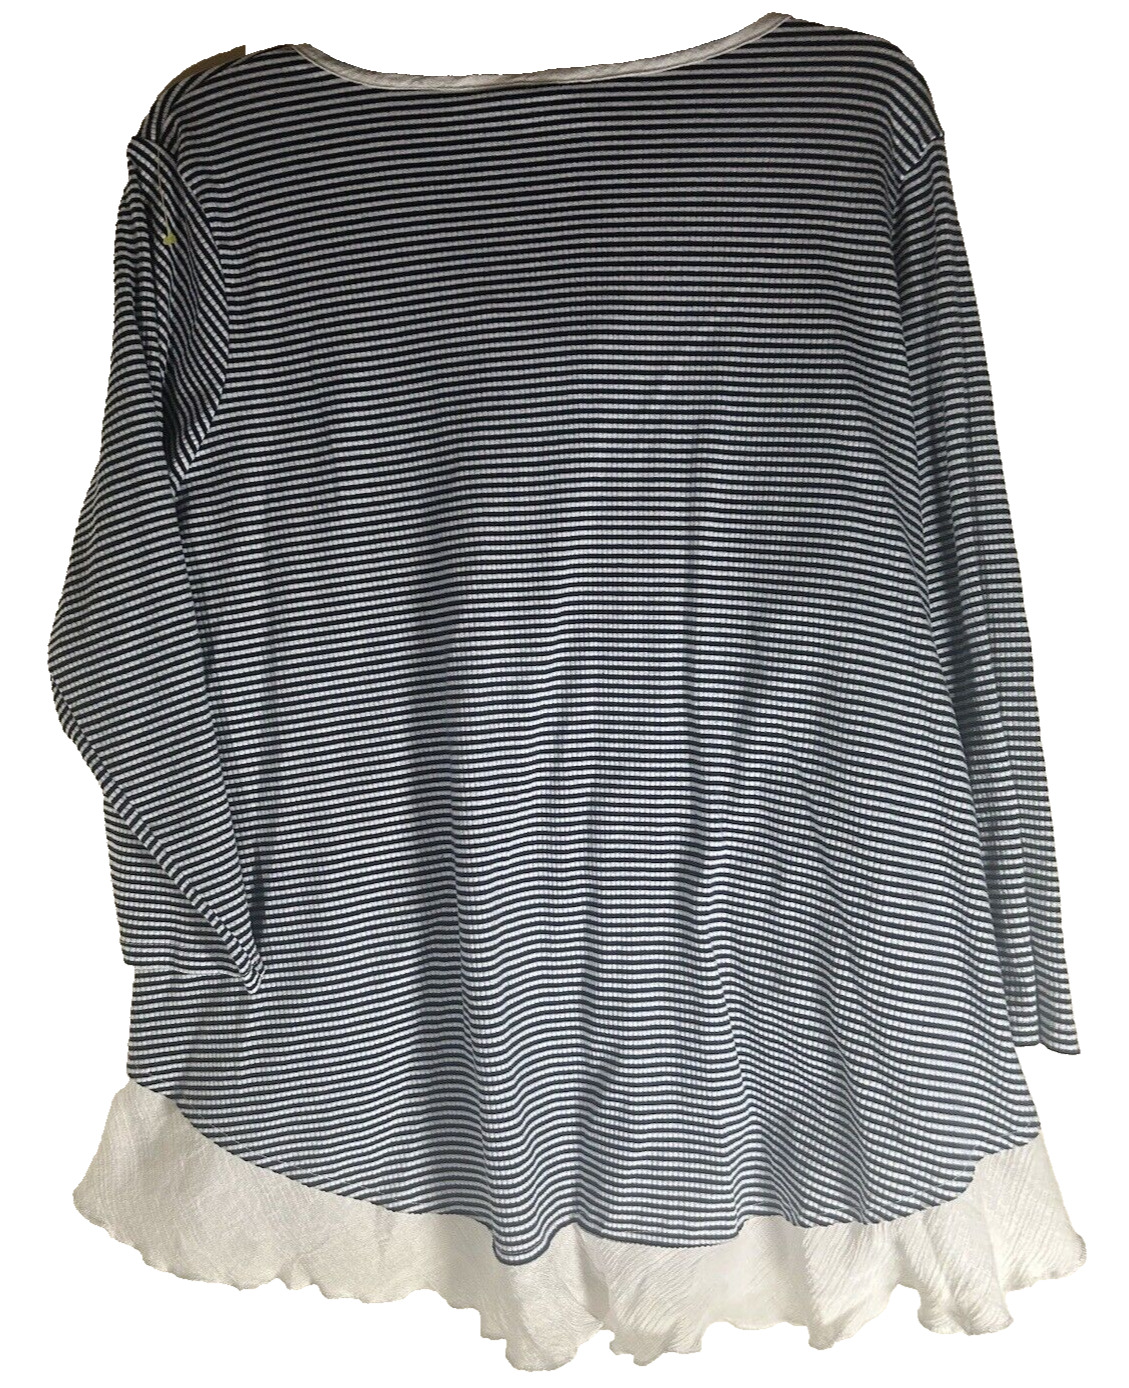 New Directions Weekends Womens Size 3X Striped Layered Blouse